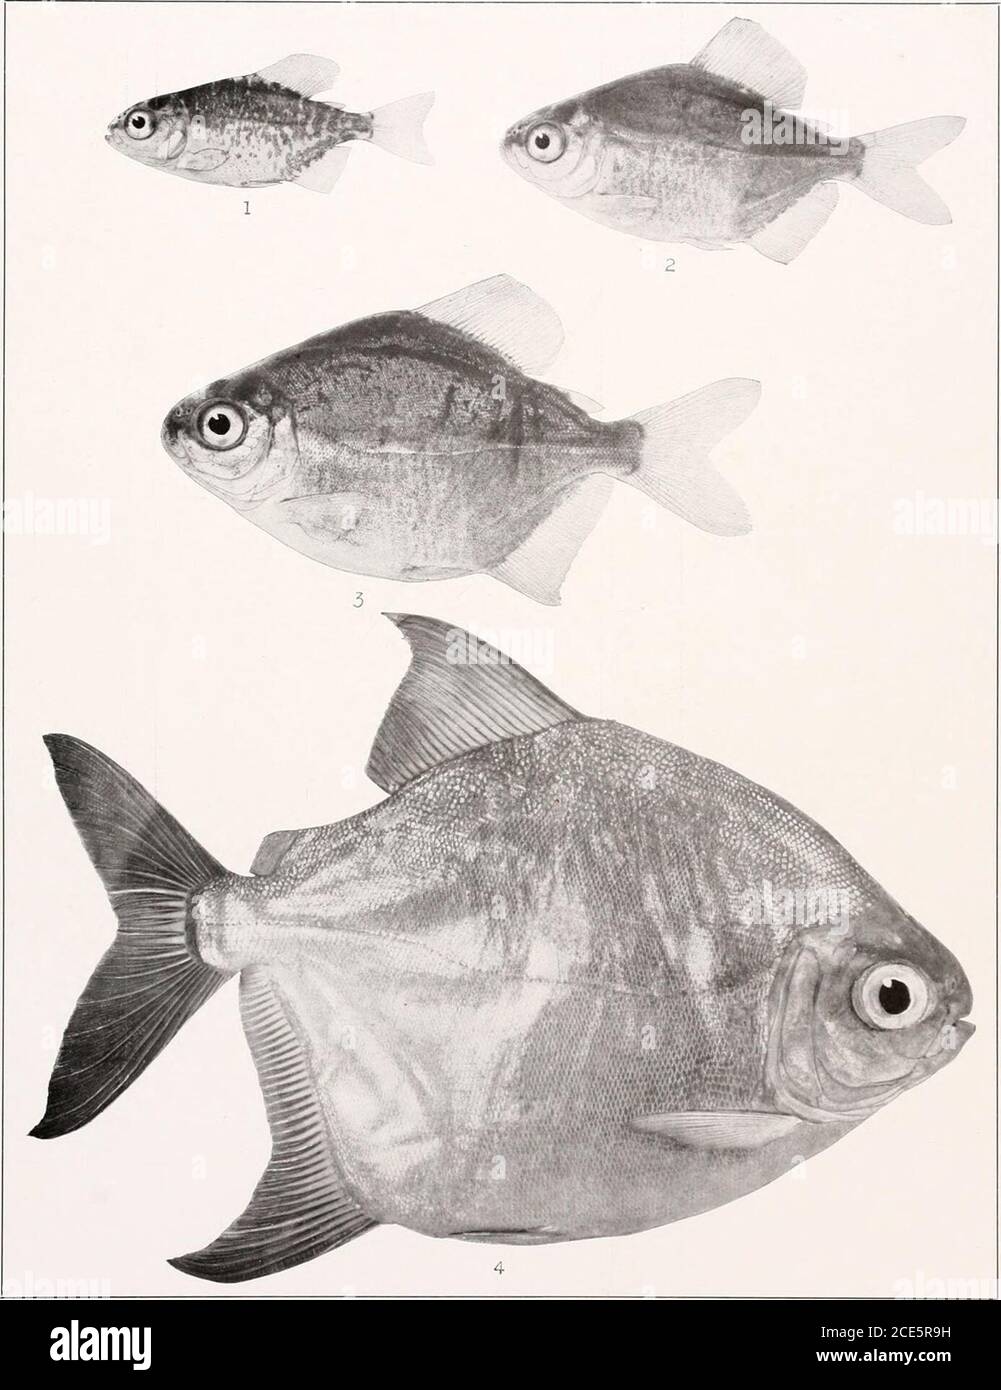 . The freshwater fishes of British Guiana, including a study of the ecological grouping of species and the relation of the fauna of the plateau to that of the lowlands . 1. Metynnis maculatus (Kneh). 65 mm. No.2216. 2. Myloplusrubrvpinnis (Mtjller andTroschel). 165 mm. No. 1129. 3. Myloplus asterias (Muller and Troschel), &lt;?. Memoirs Carnegie Museum, Vol. V, Plate lvii. Myloplus rhomboidalis (Cttvier). 1.22 mm. No. 2219a. 2.31.5 mm. No. 22196. 3.40 mm. No. 2219c. 4. 219 mm. No. 1490. Memoirs Carnegie Museum, Vol. V. Plate LIX. Stock Photo